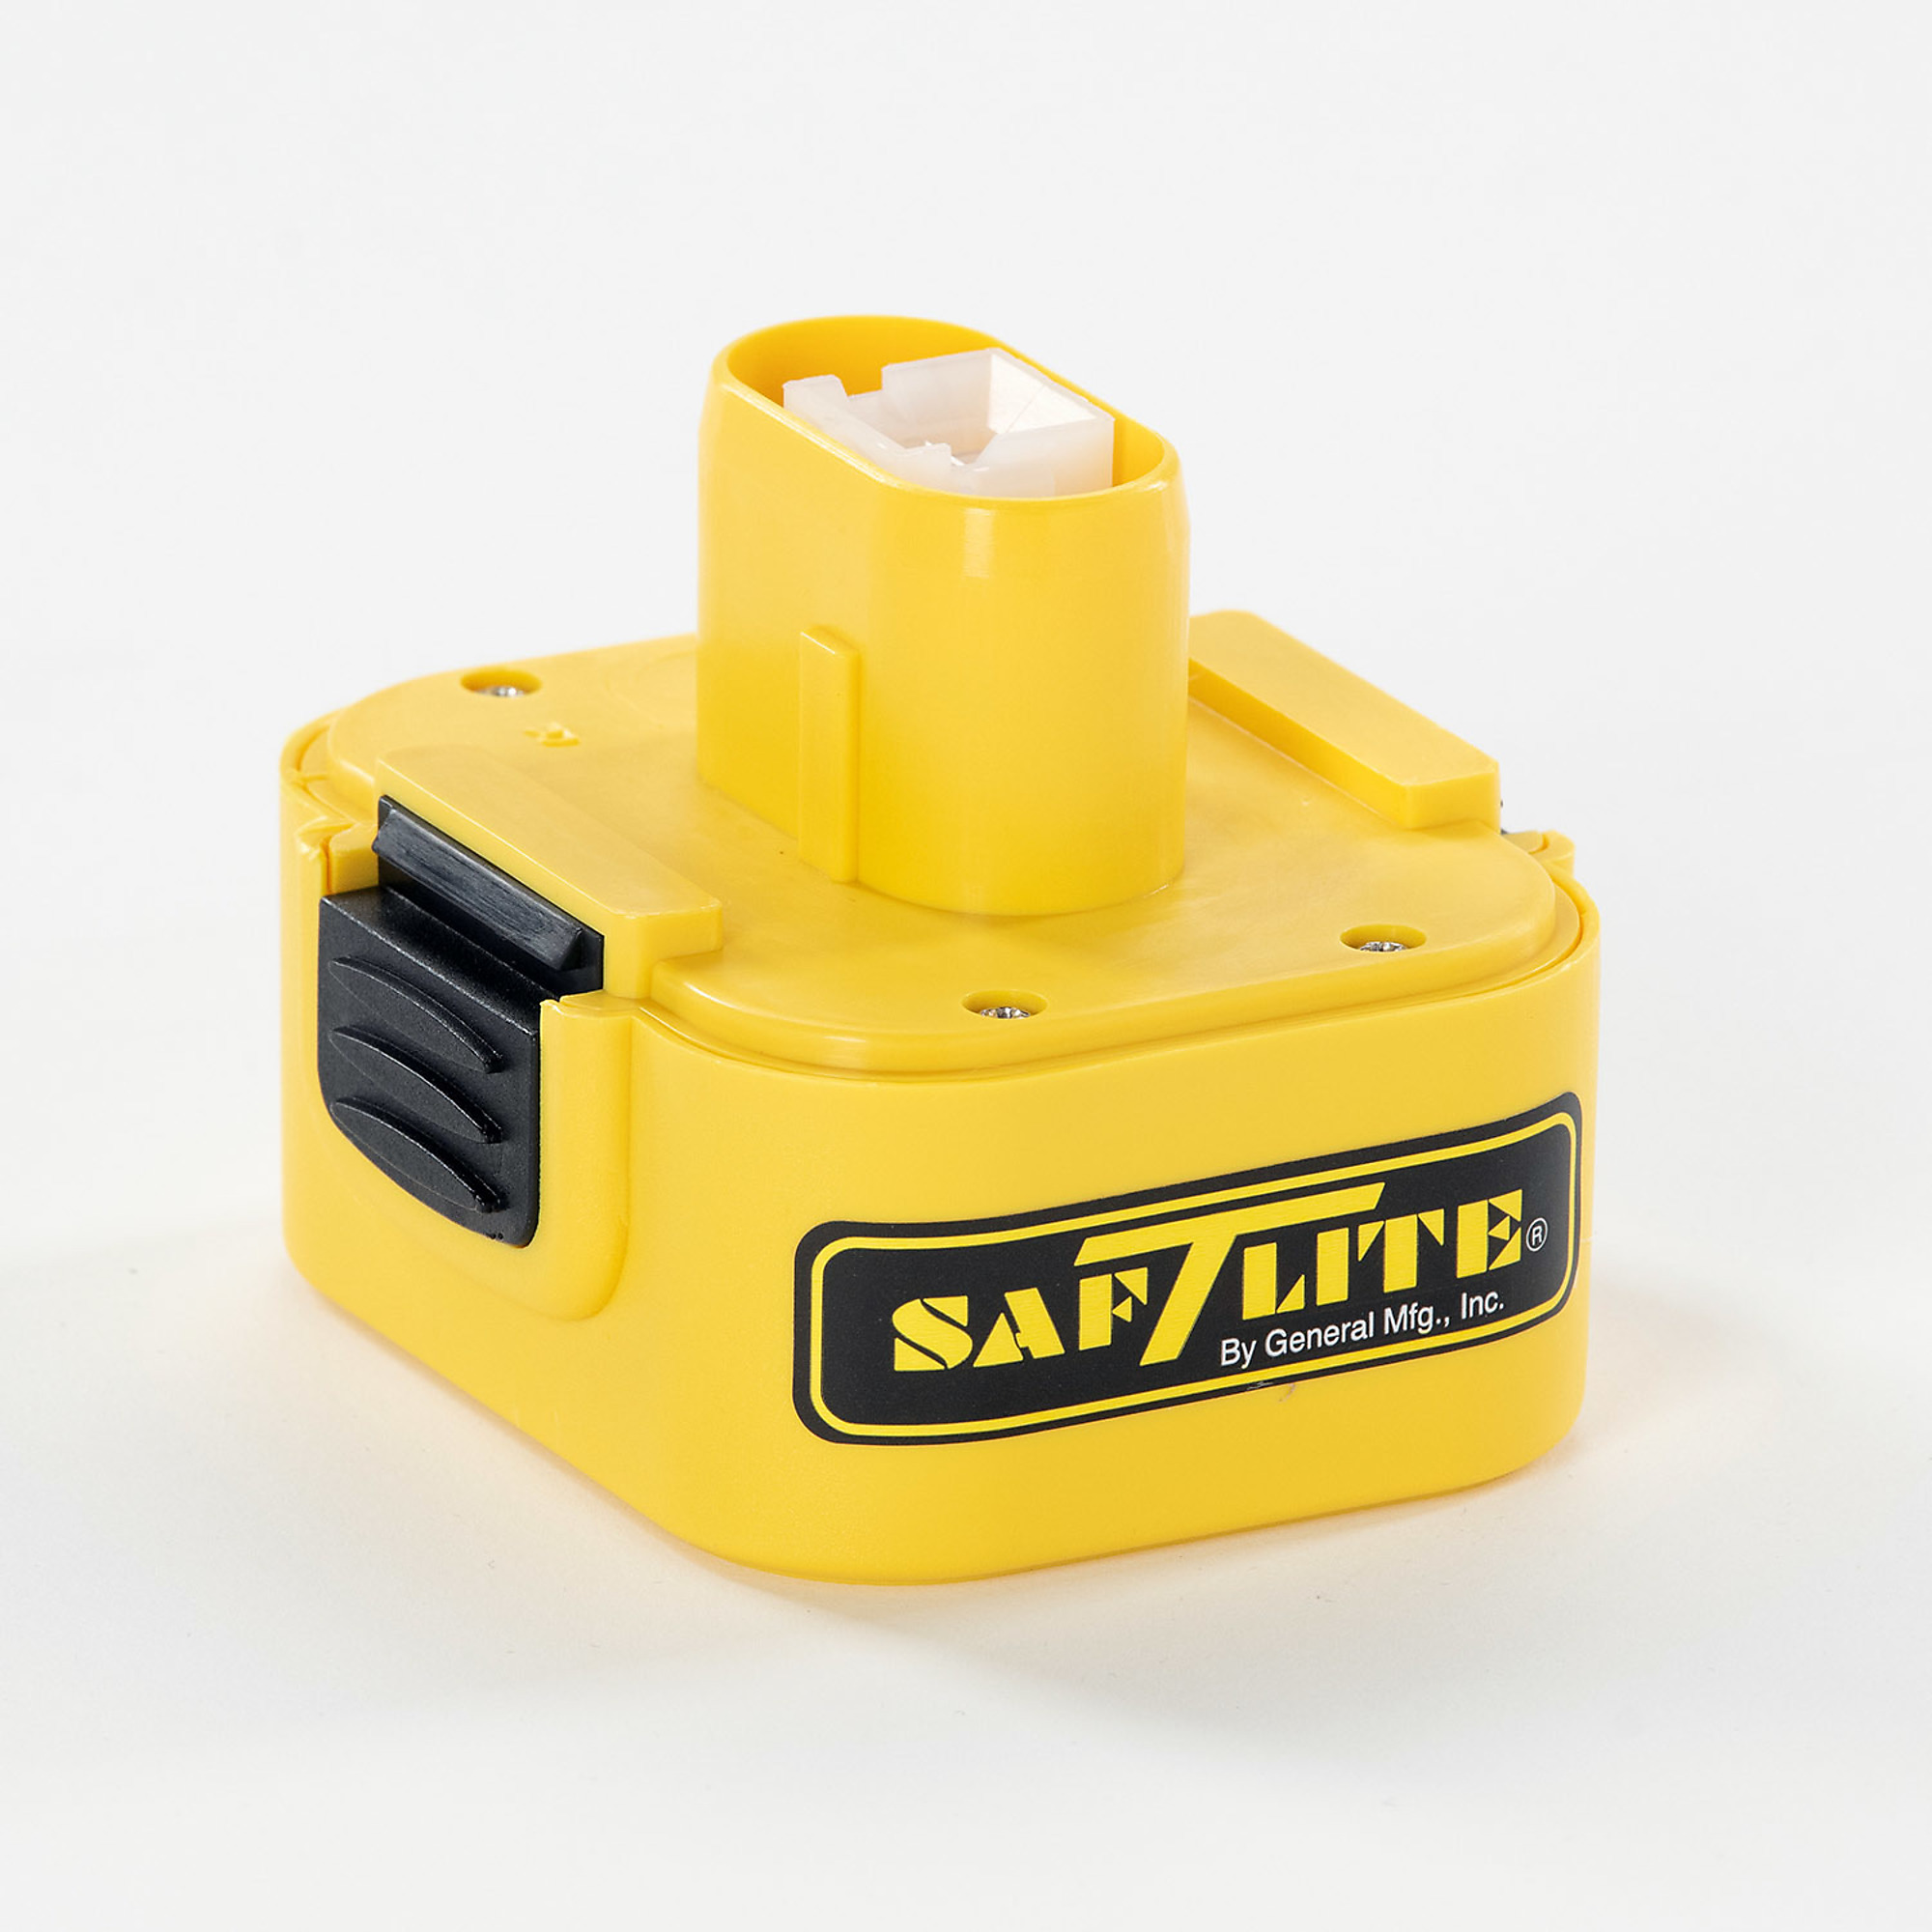 SAFTLITE, STUBBY II CORDLESS BATTERY, Light Type LED, Lens Color Clear, Included (qty.) 1, Model 5000-1639